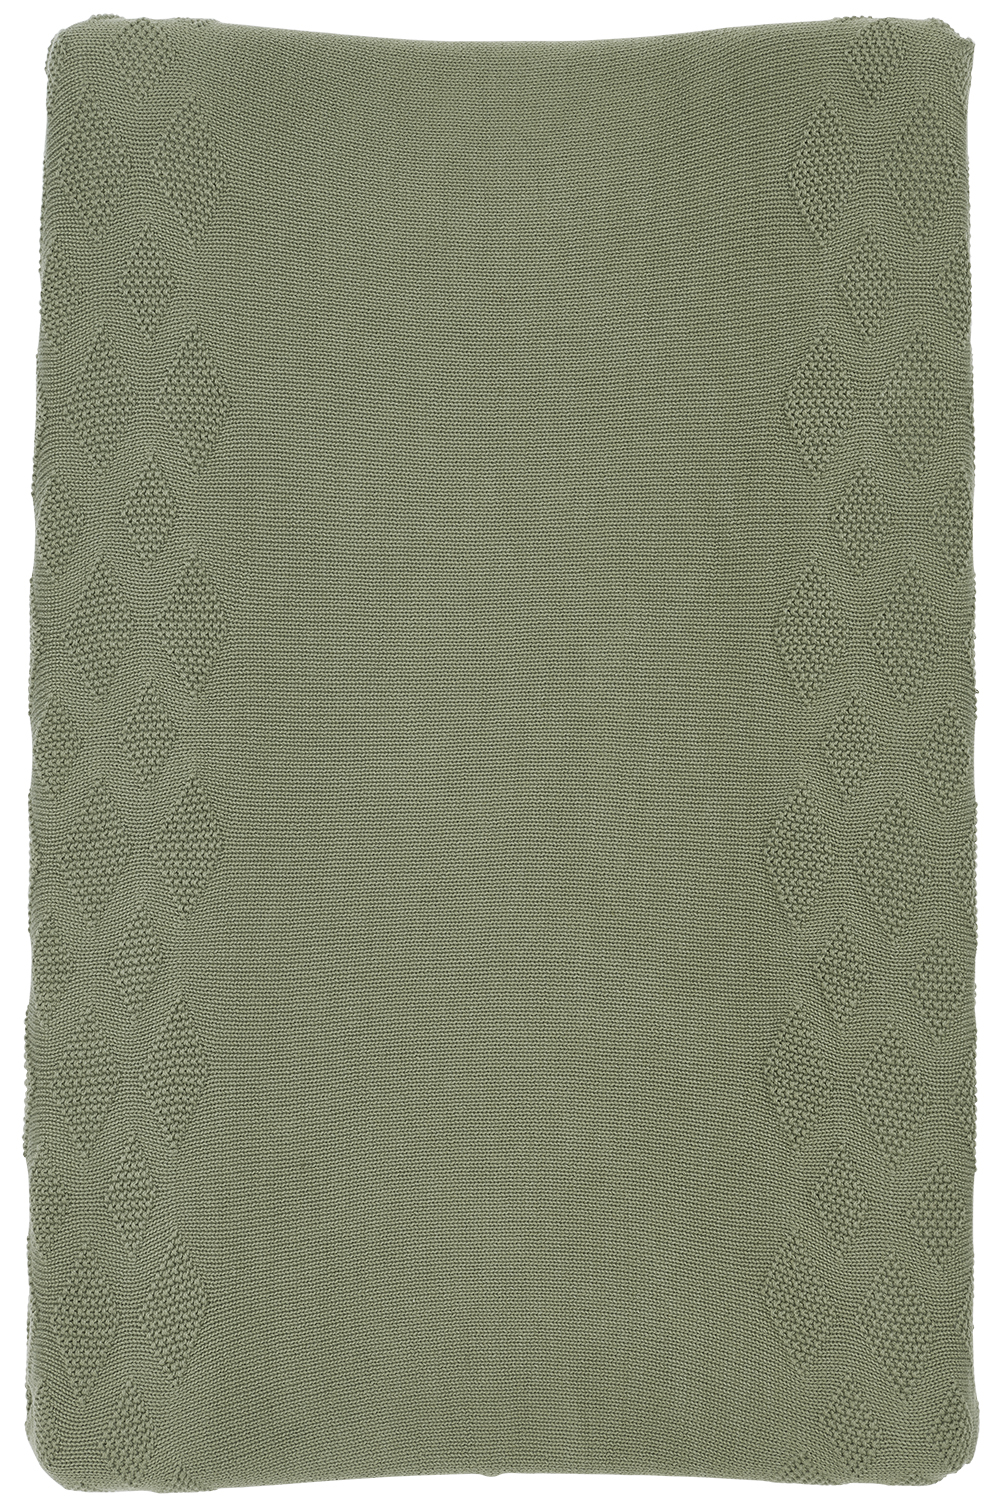 Changing mat cover biological Diamond - forest green - 50x70cm